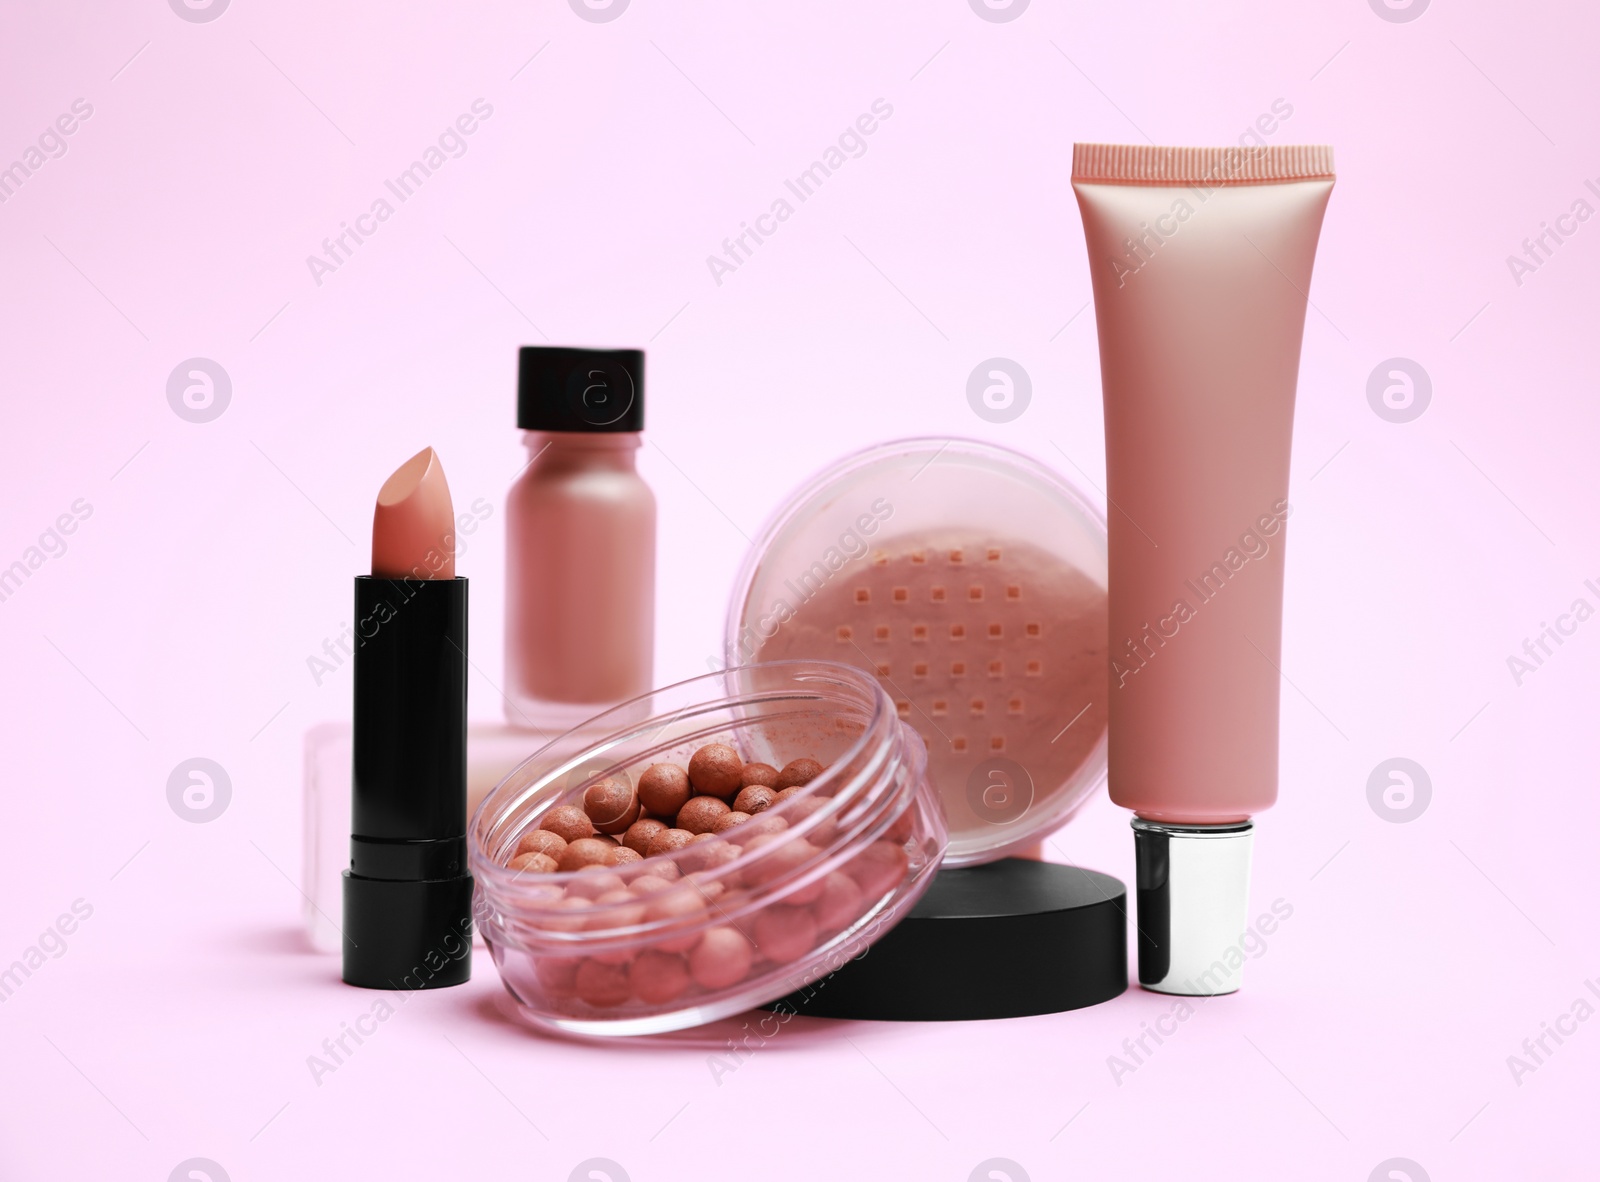 Photo of Face powders and other decorative cosmetic products on pink background